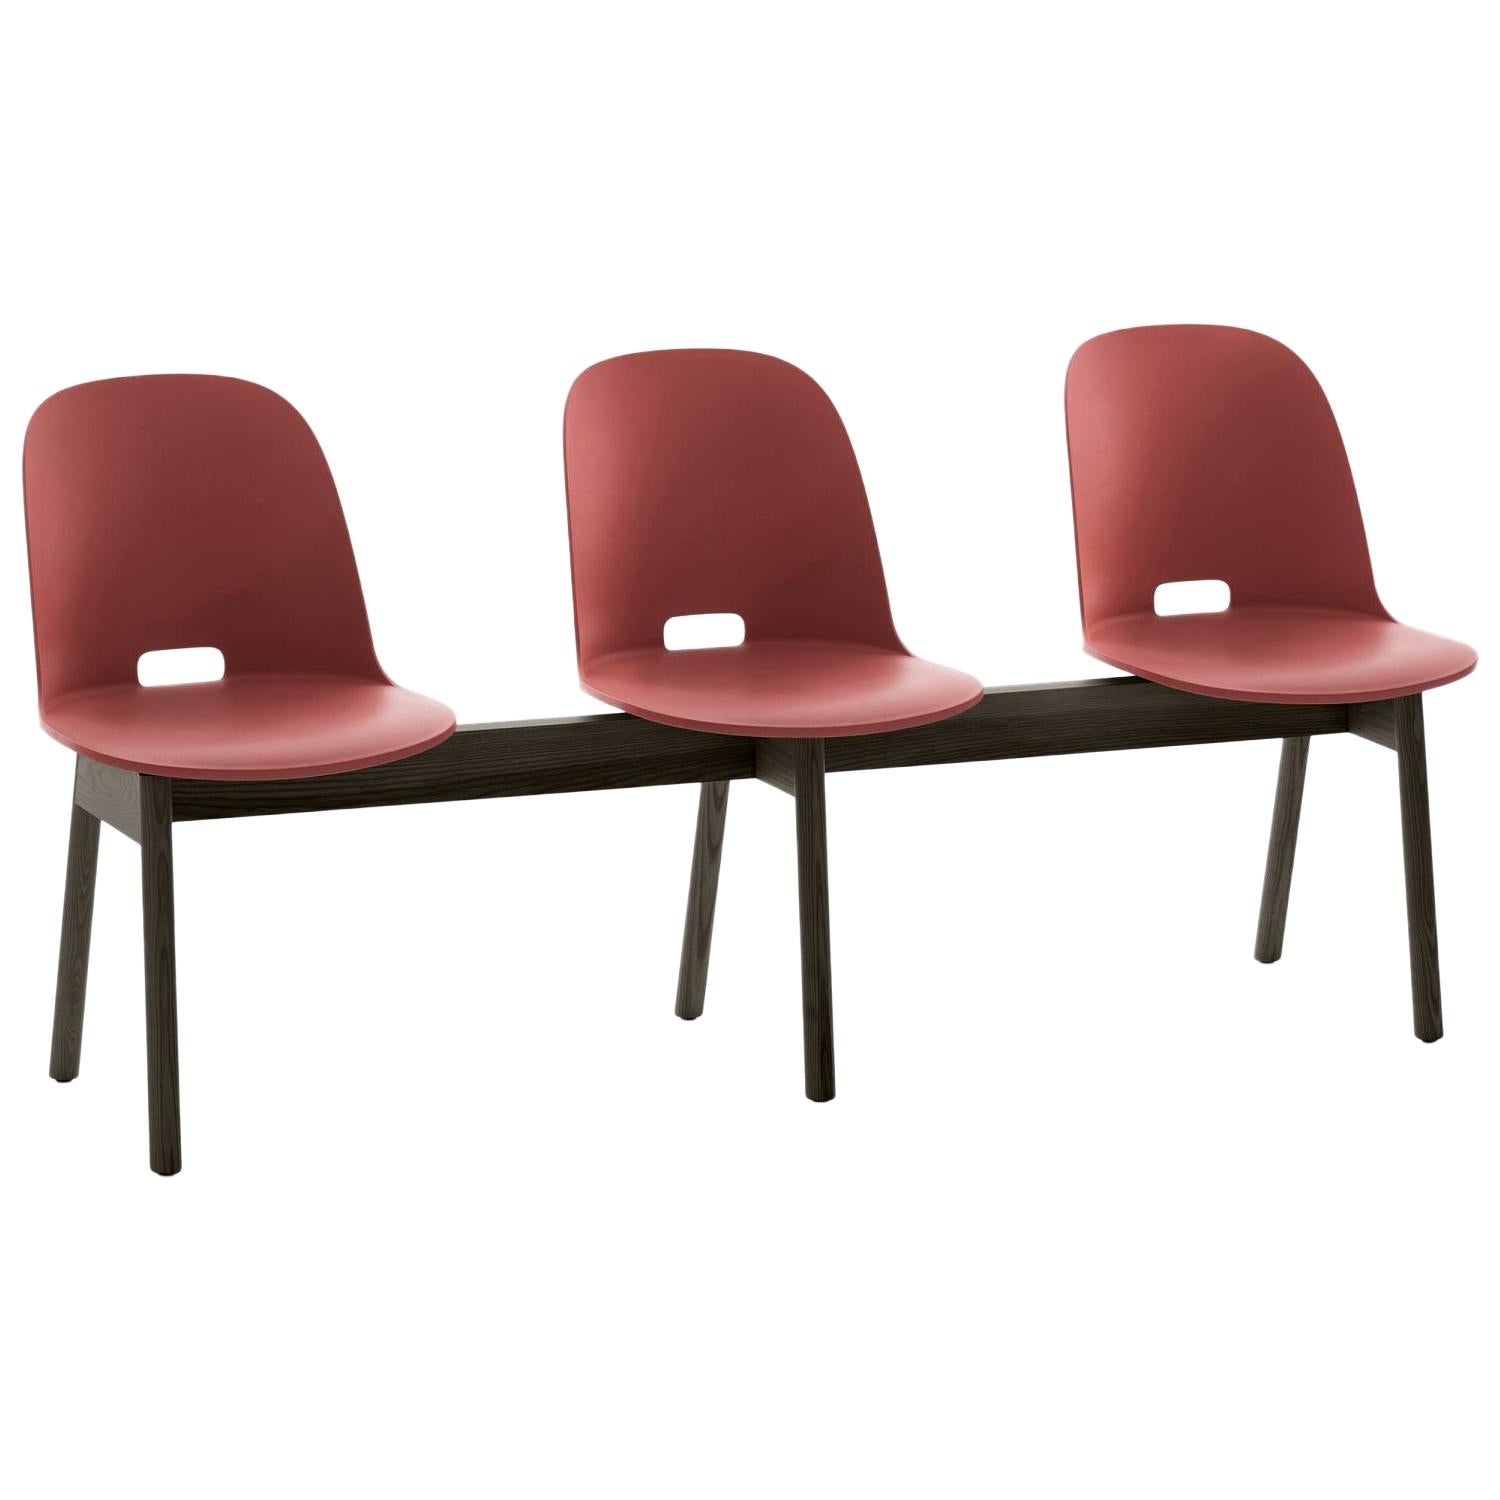 Emeco Alfi 3-Seat Bench in Red and Dark Ash with High Back by Jasper Morrison